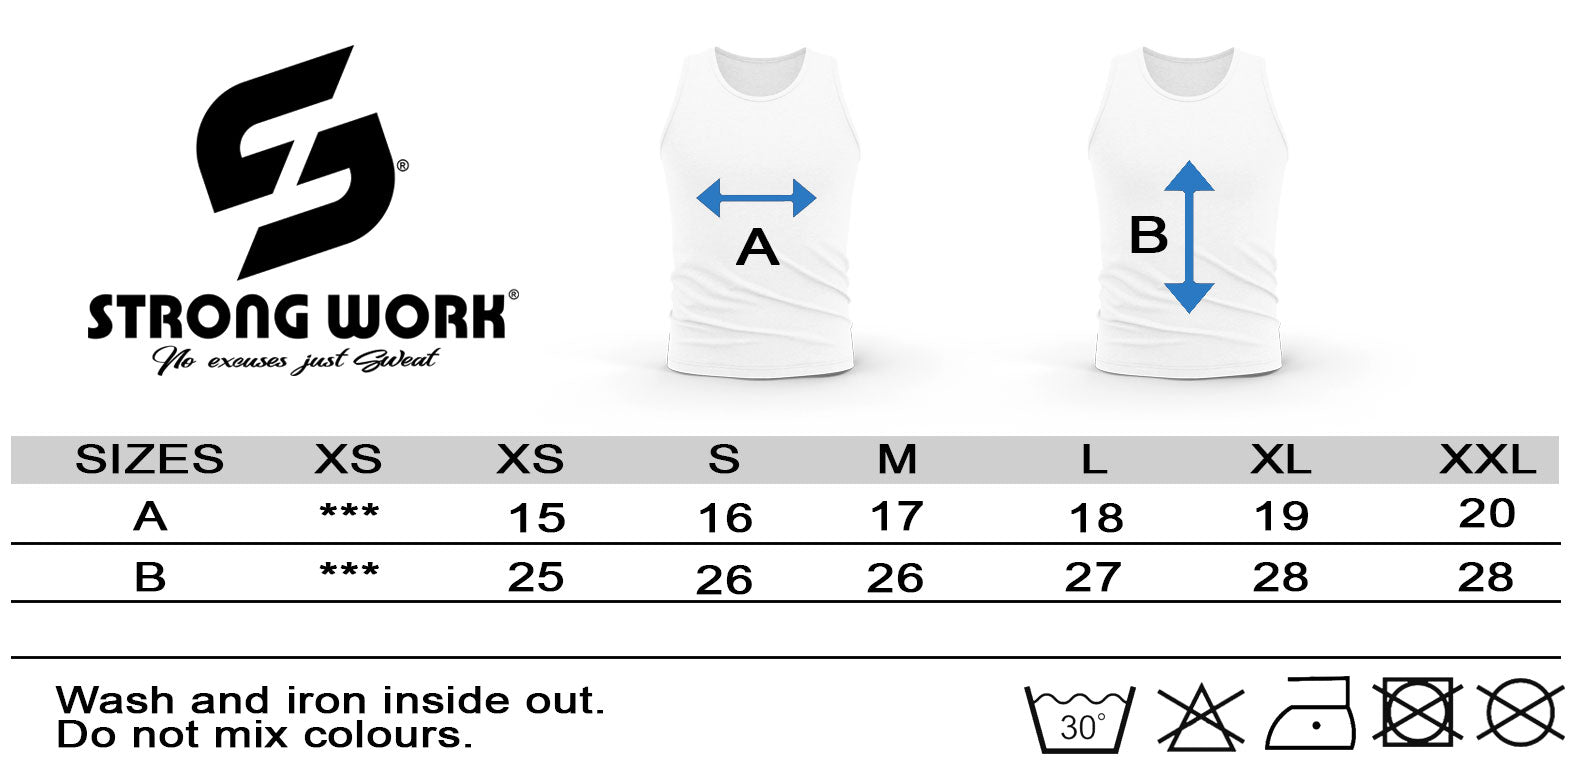 STRONG WORK NEW CLASSIC TANK TOP FOR WOMEN